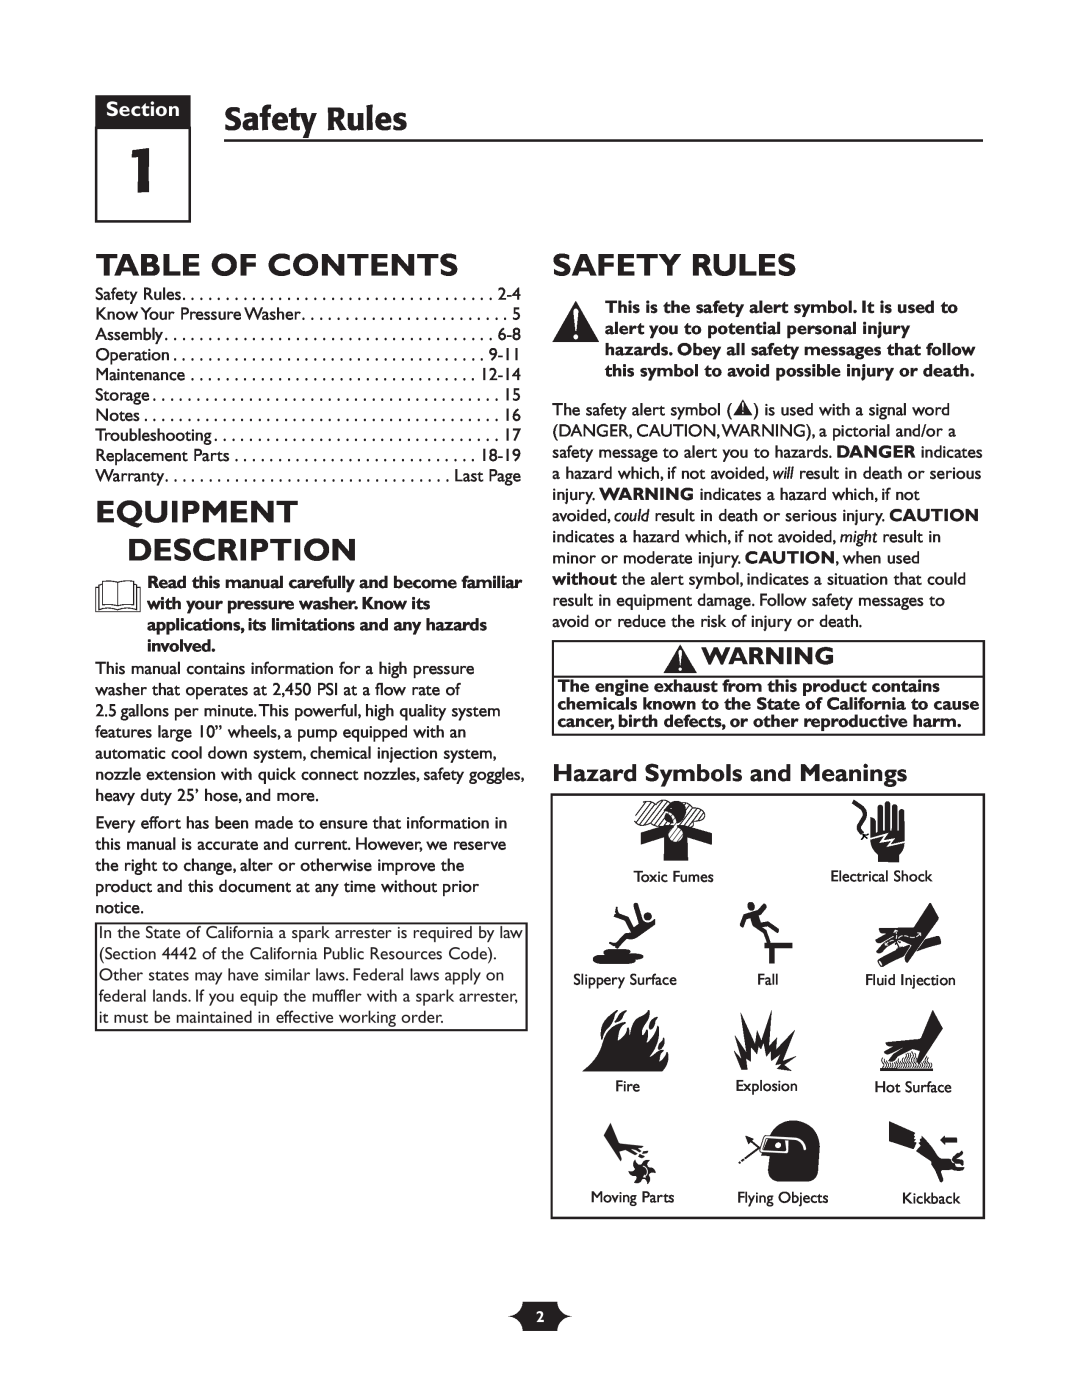 Briggs & Stratton 1903 Safety Rules, Table Of Contents, Equipment Description, Hazard Symbols and Meanings, Section 